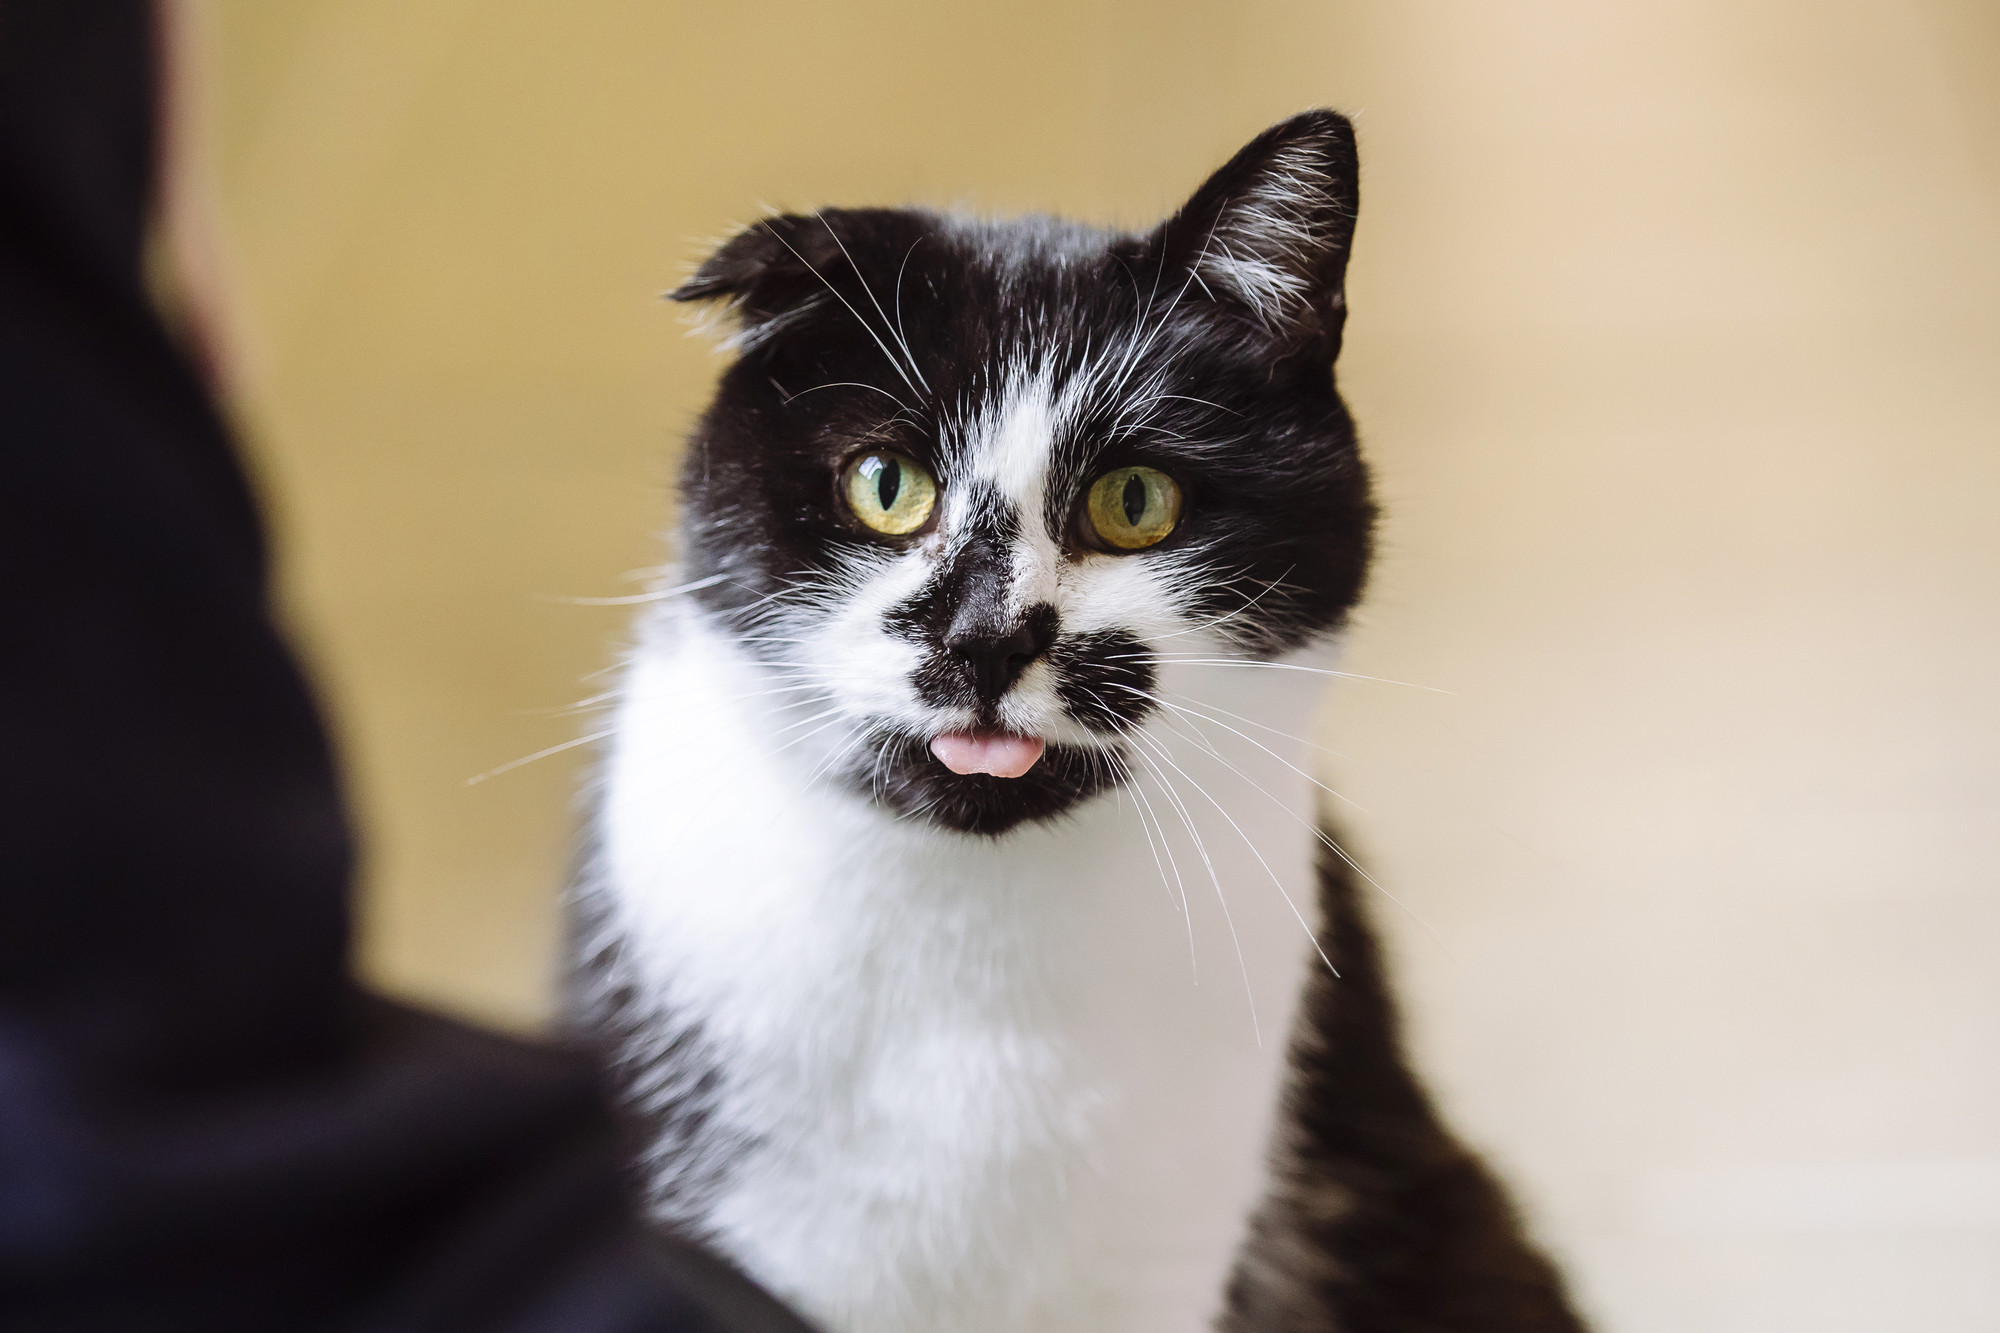 Black and white cat with one ear down and tongue sticking out